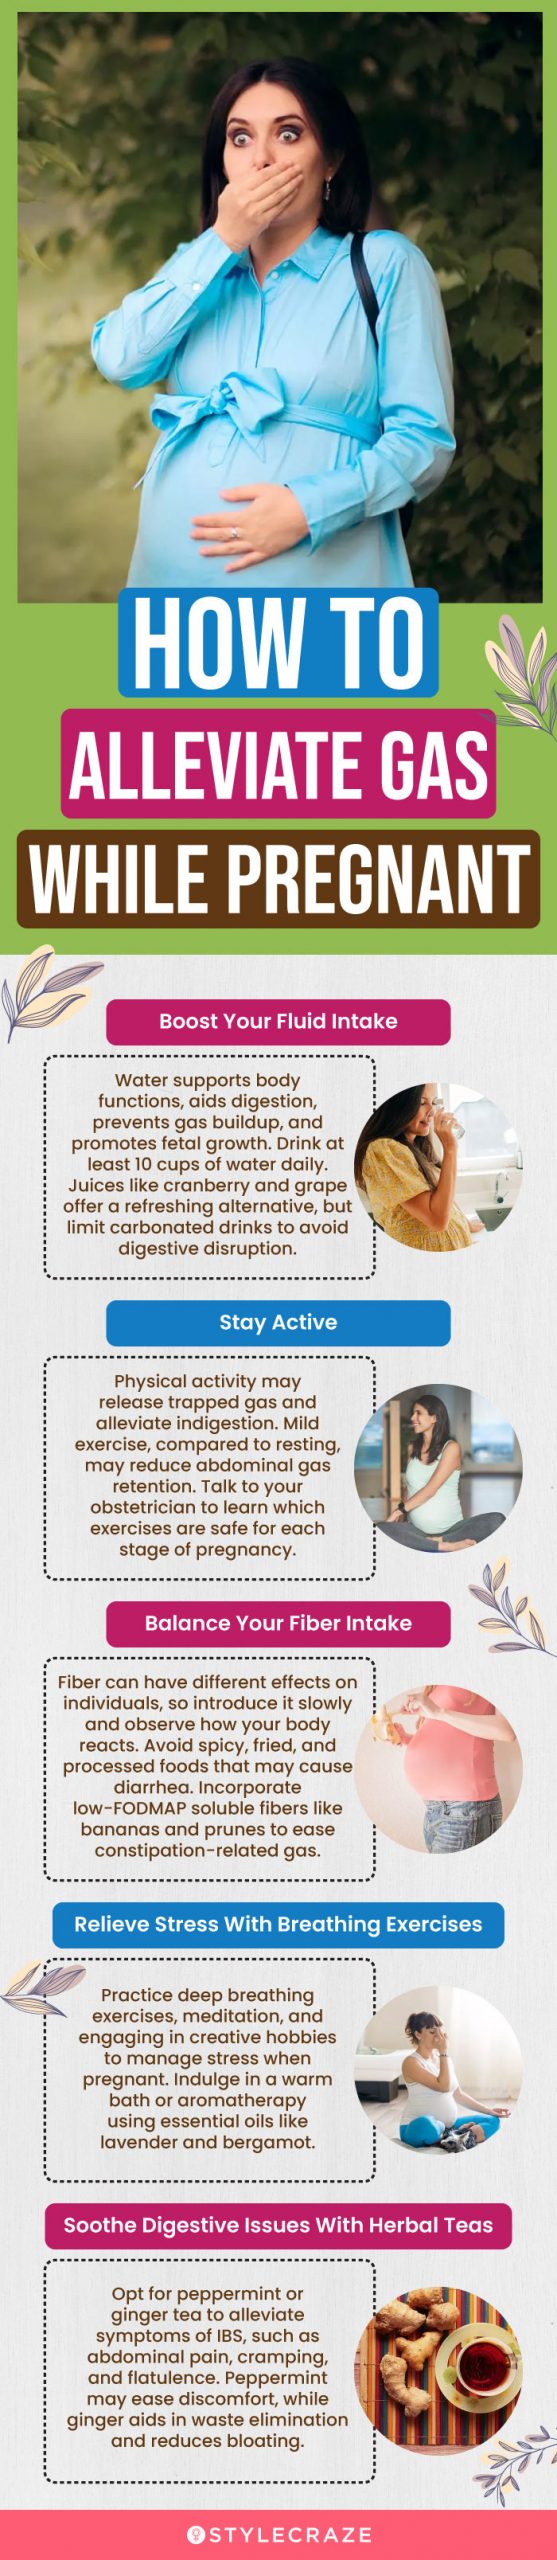 how to alleviate pregnancy gas (infographic)